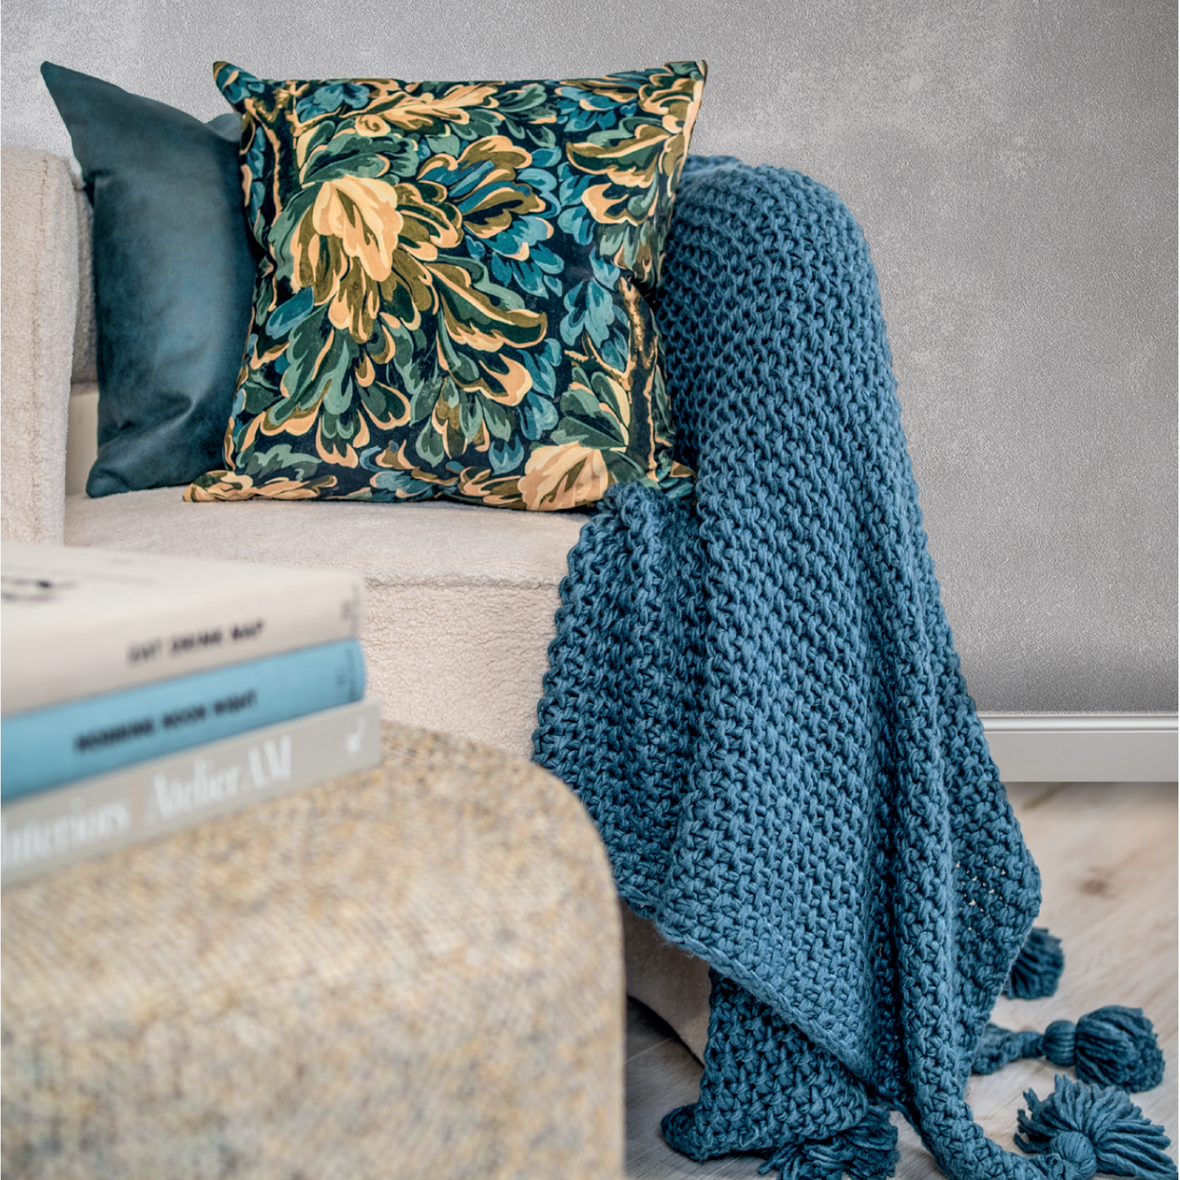 The Scatterbox Leaf Green Cushion on a chair with the Collins blue throw draped over beside it